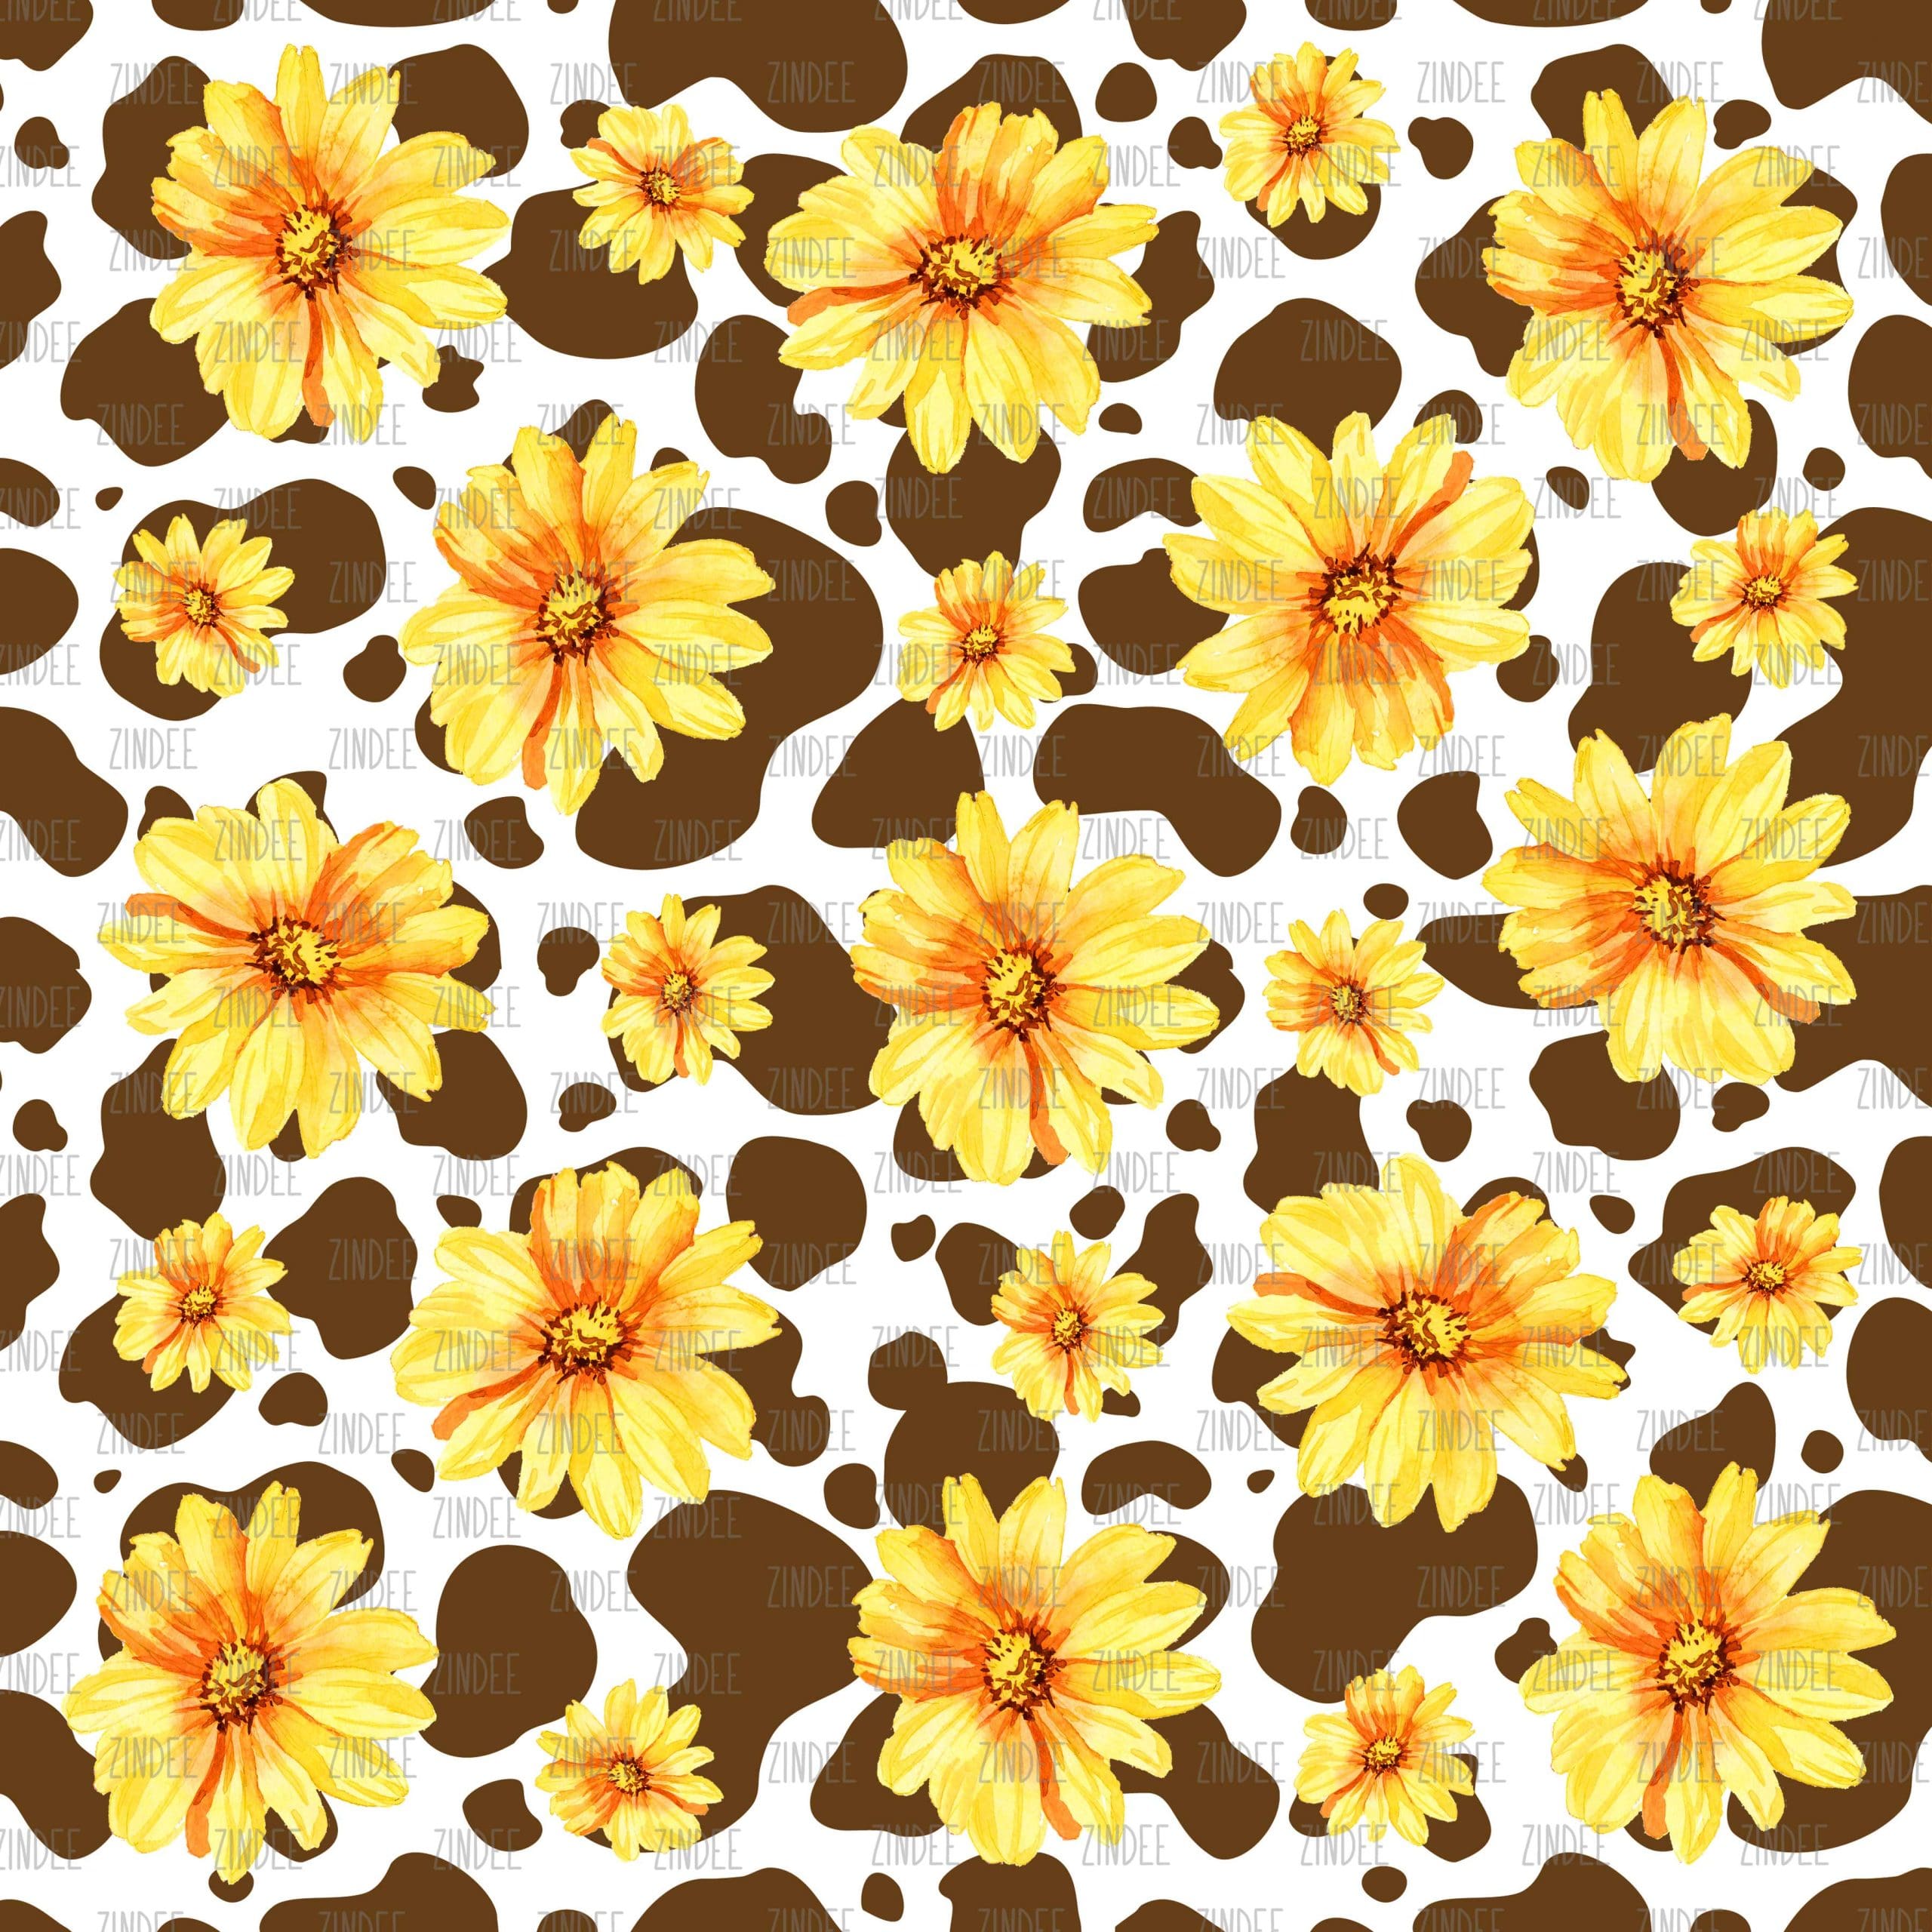 https://zindee.com/wp-content/uploads/2023/10/brown-cow-print-n-sunflowers-pp-scaled-1.jpg